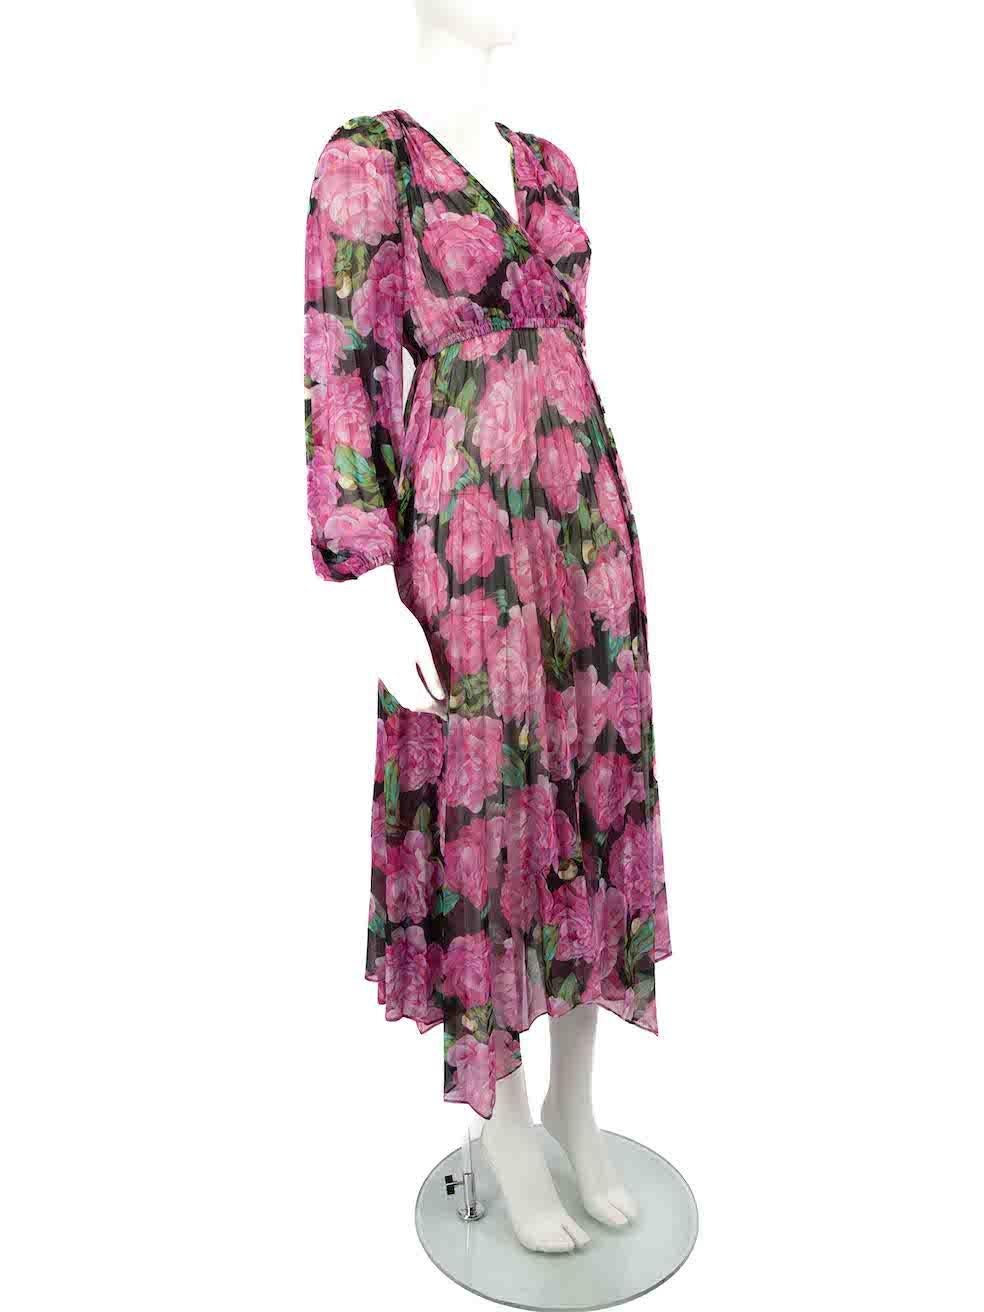 CONDITION is Very good. Hardly any visible wear to dress is evident on this used Kooples designer resale item.
 
 Details
 Pink
 Synthetic
 Dress
 Sheer
 Floral print
 Long sleeves
 Maxi
 V-neck
 Front snap button fastening
 Elasticated waist
 
 
